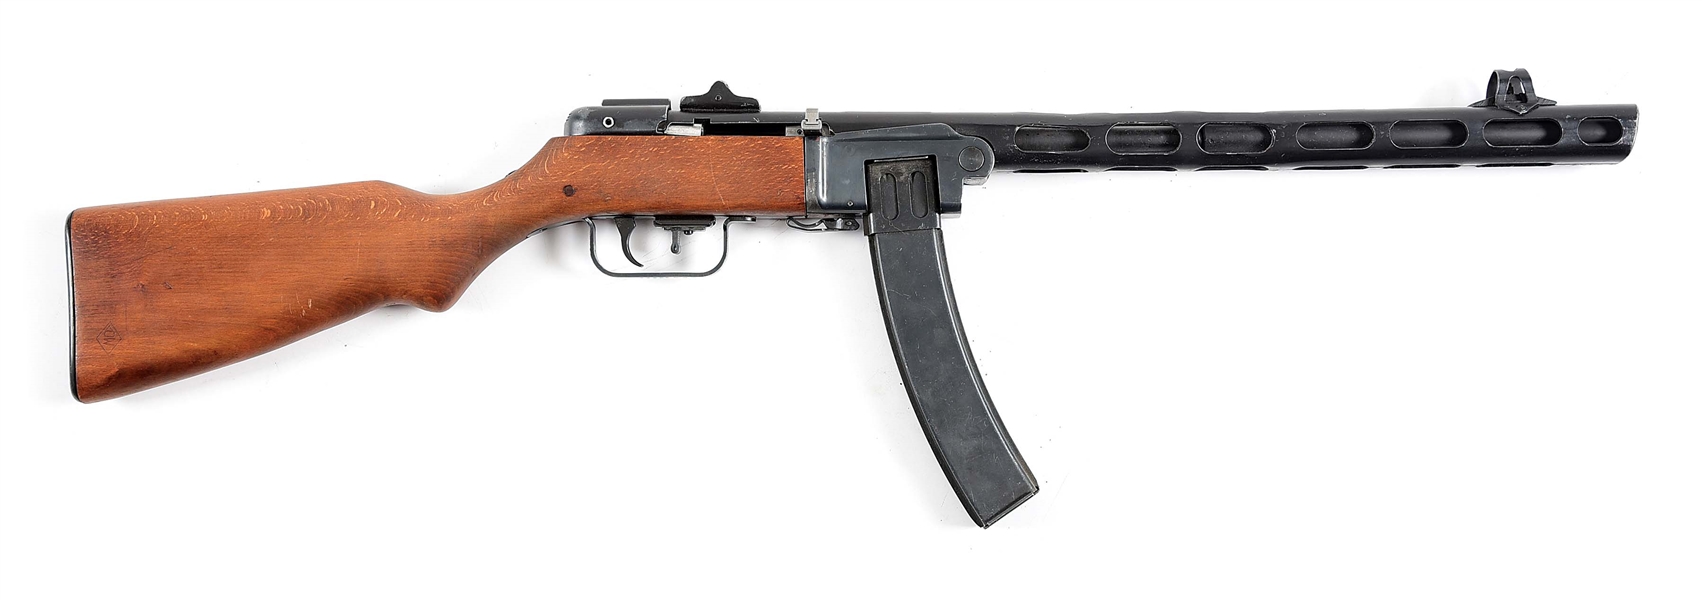 (C) AA ARMS SR-41 SEMI-AUTOMATIC RIFLE WITH 6 ADDITIONAL MAGAZINES & 2 CANVAS MAGAZINE POUCHES.